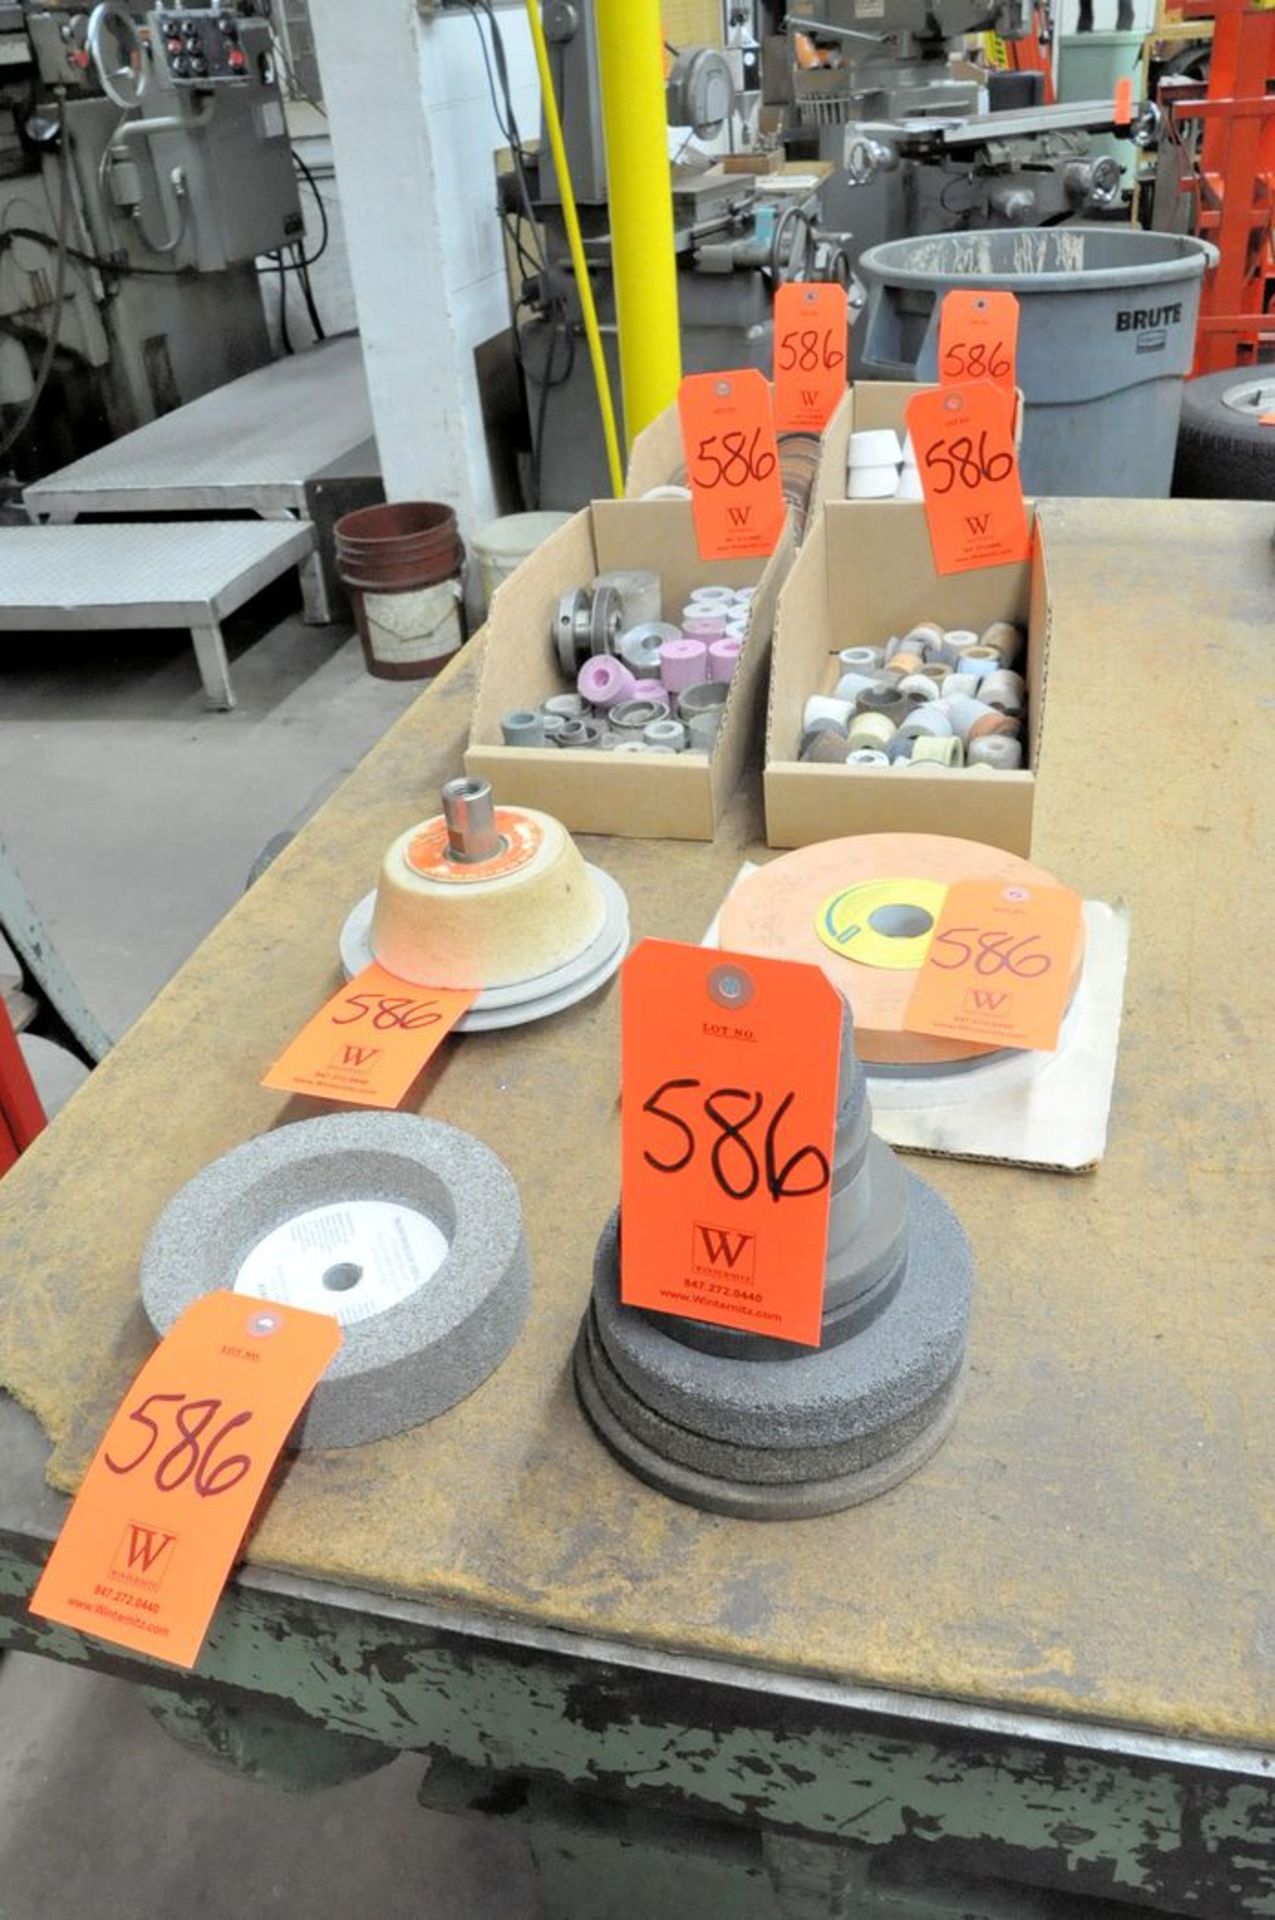 Lot - Various Grinding Wheels in (5) Stacks and (4) Boxes